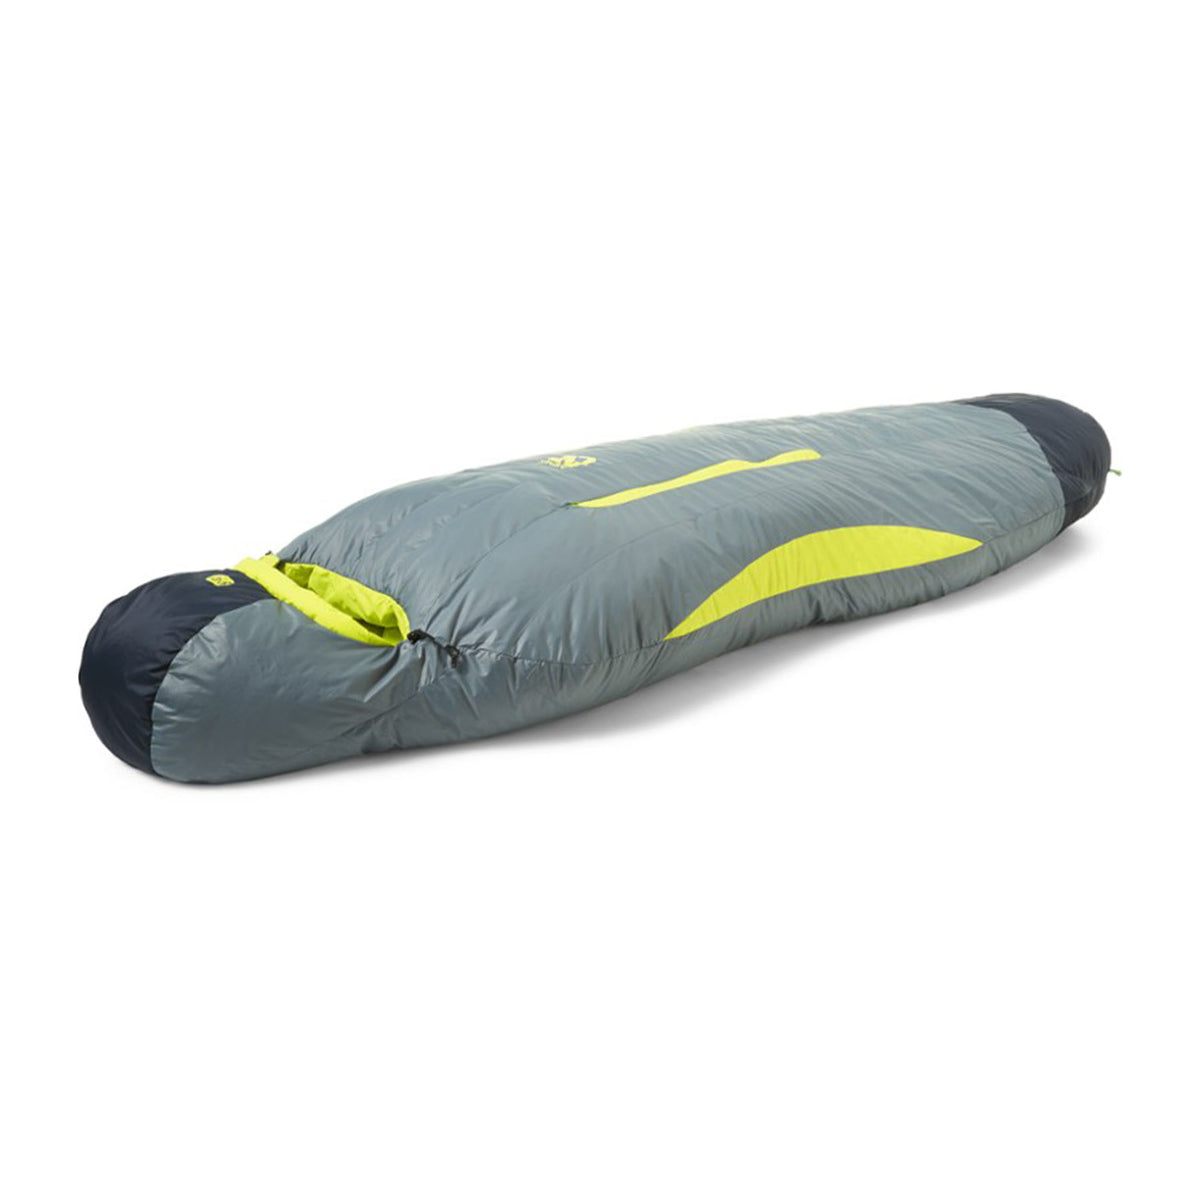 Hero image featuring a side angle view of the Nemo Men's Disco 30 degree sleeping bag in spark fortress. The sleeping bag is fully zipped.